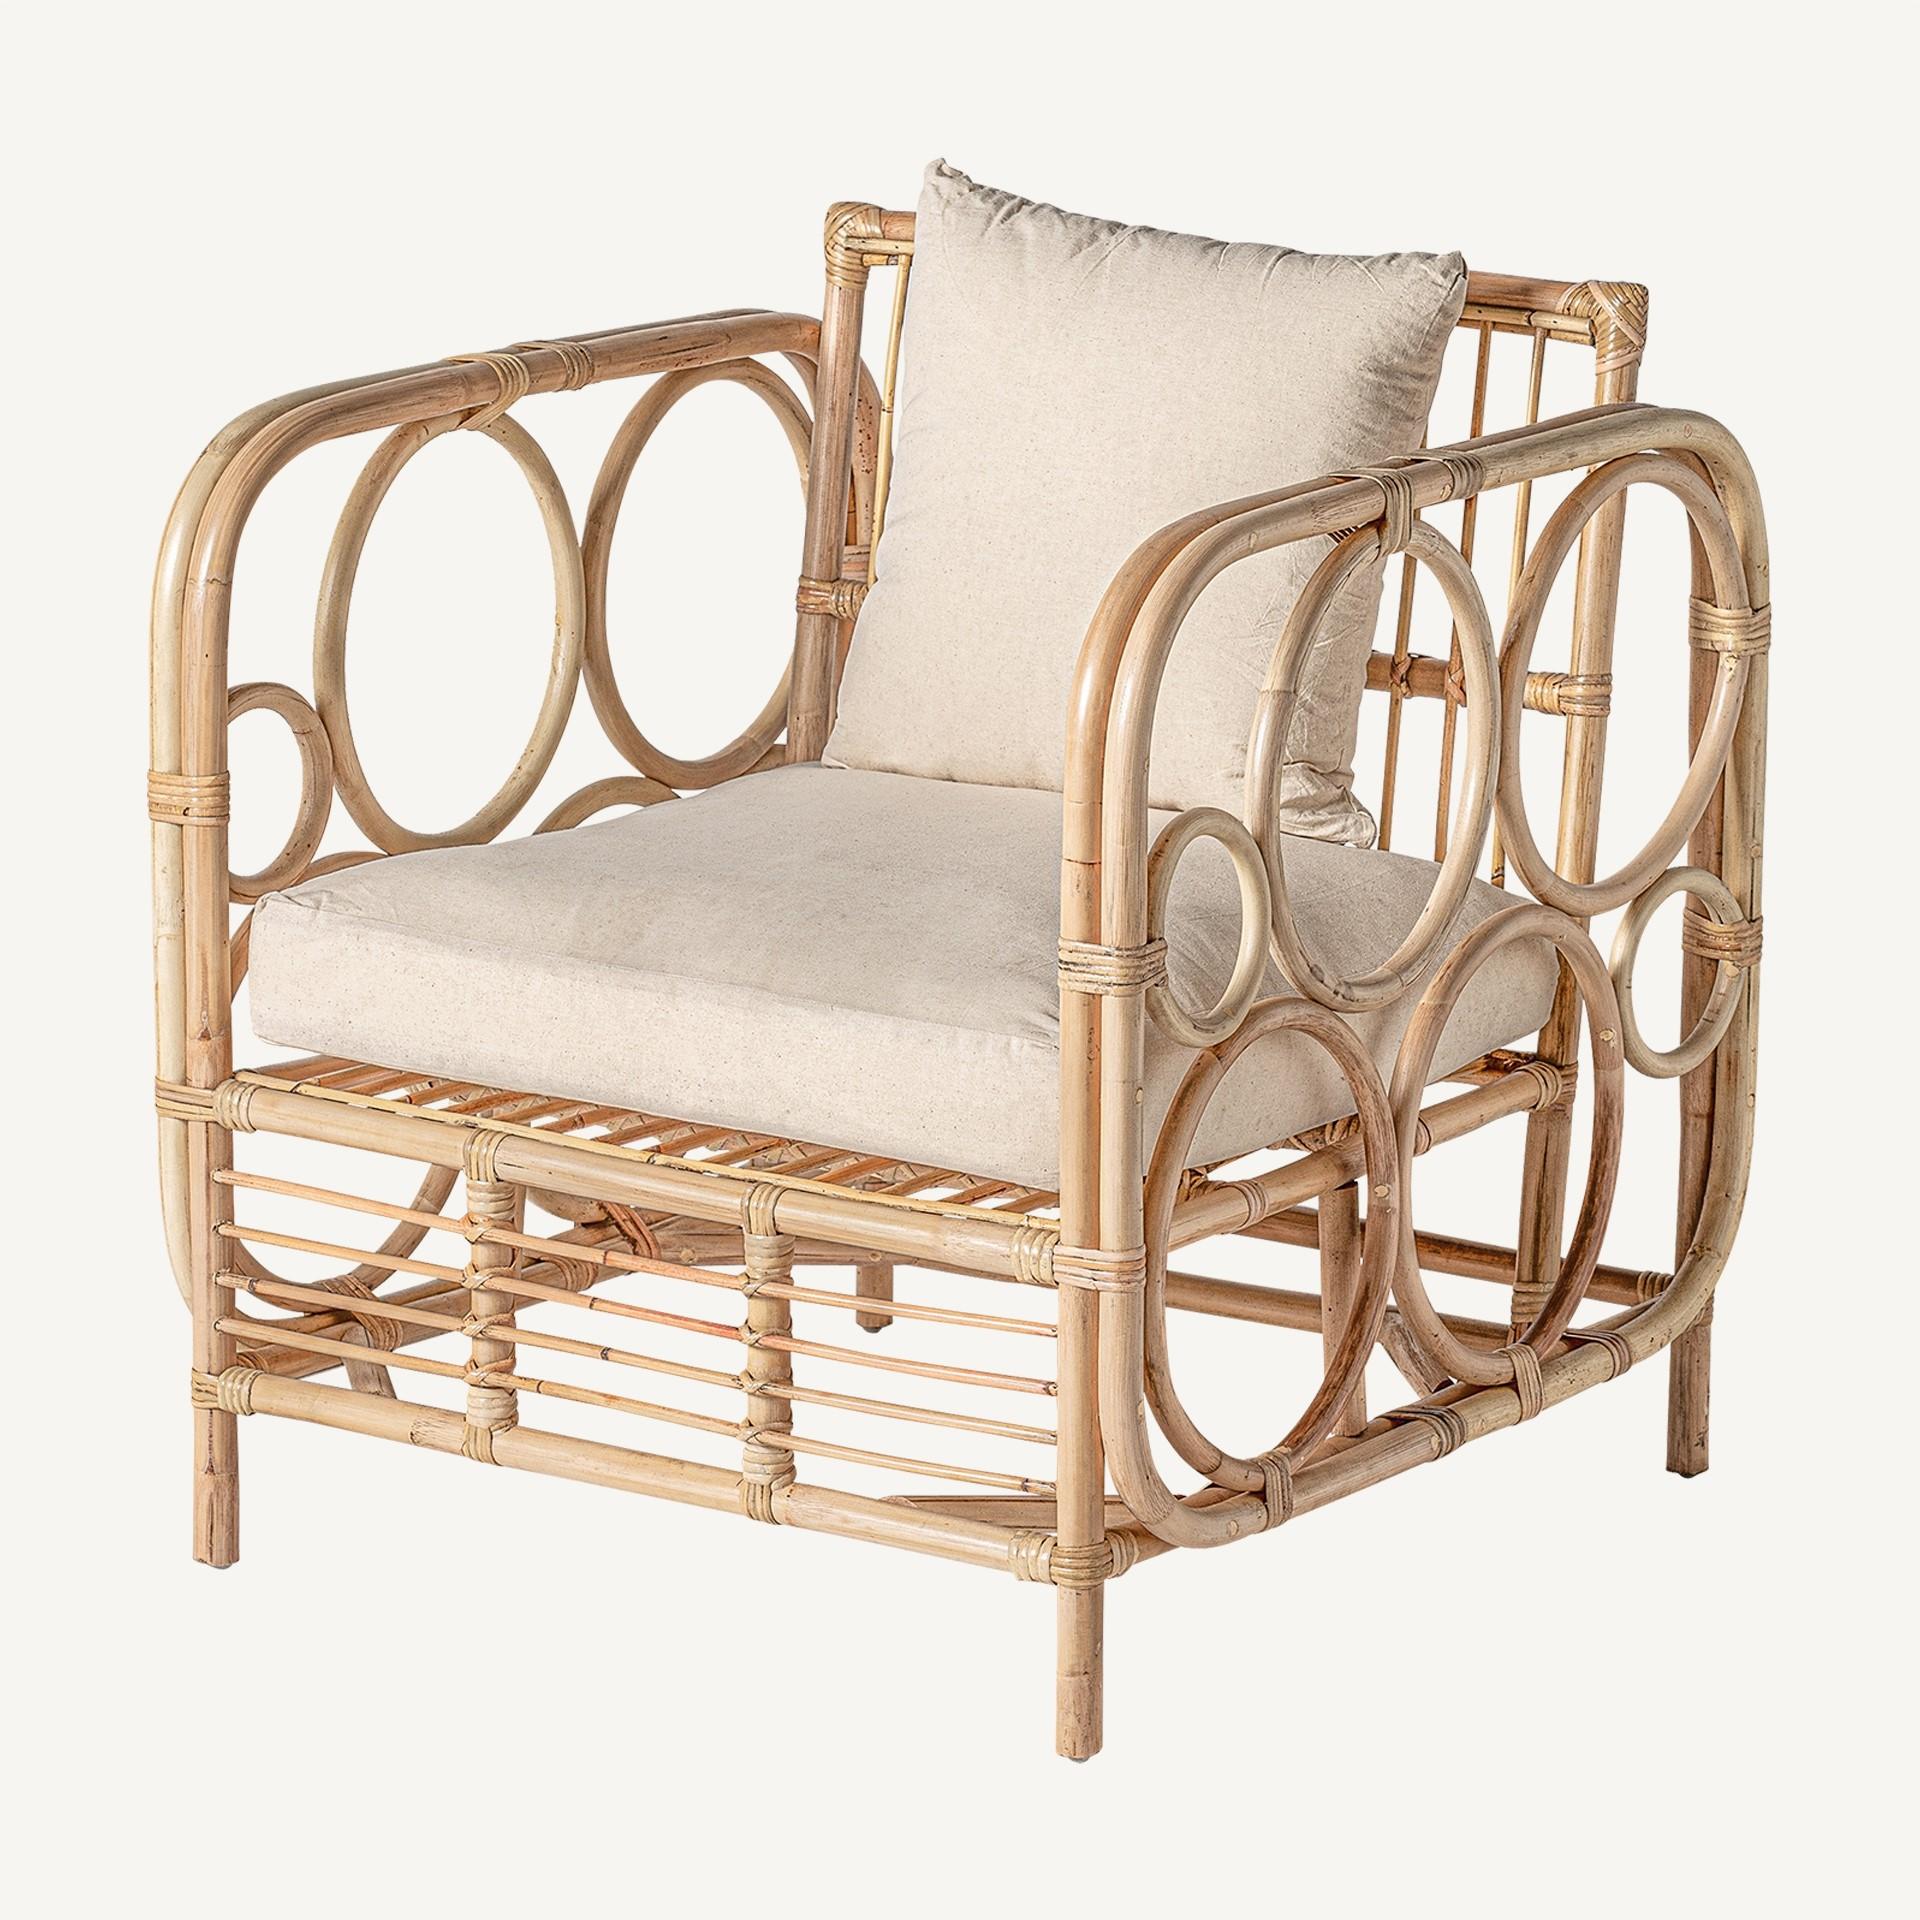 Contemporary 1960s Italian Design Style Rattan and Beige Linen Fabric Armchair For Sale